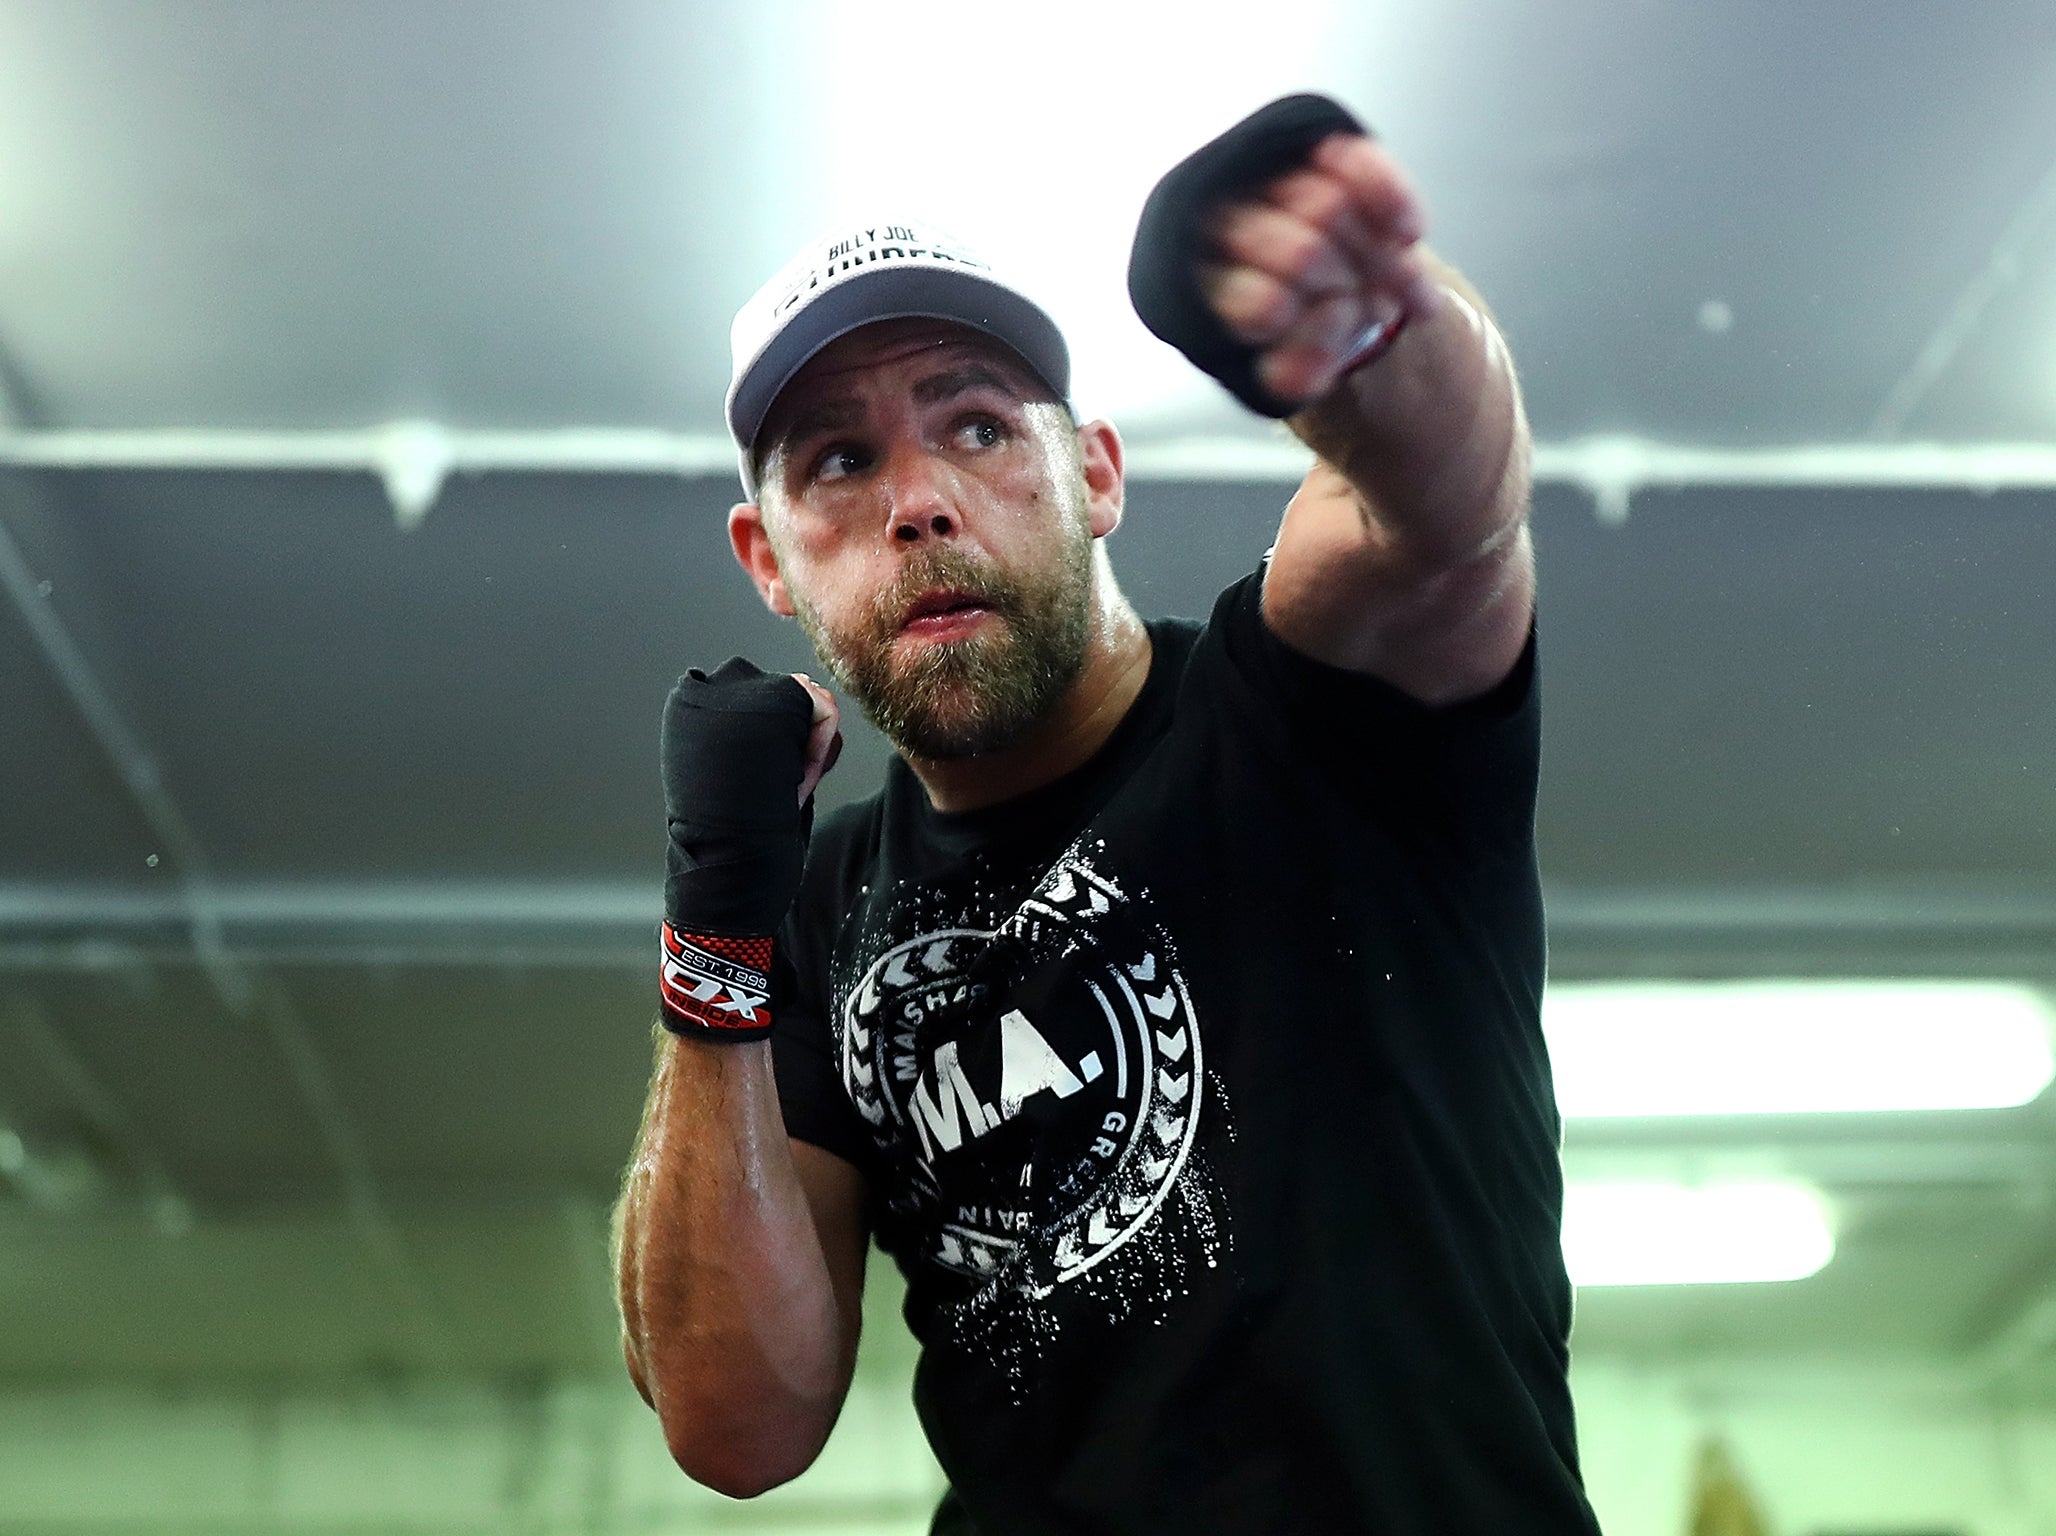 Billy Joe Saunders has been hit with a £100k fine